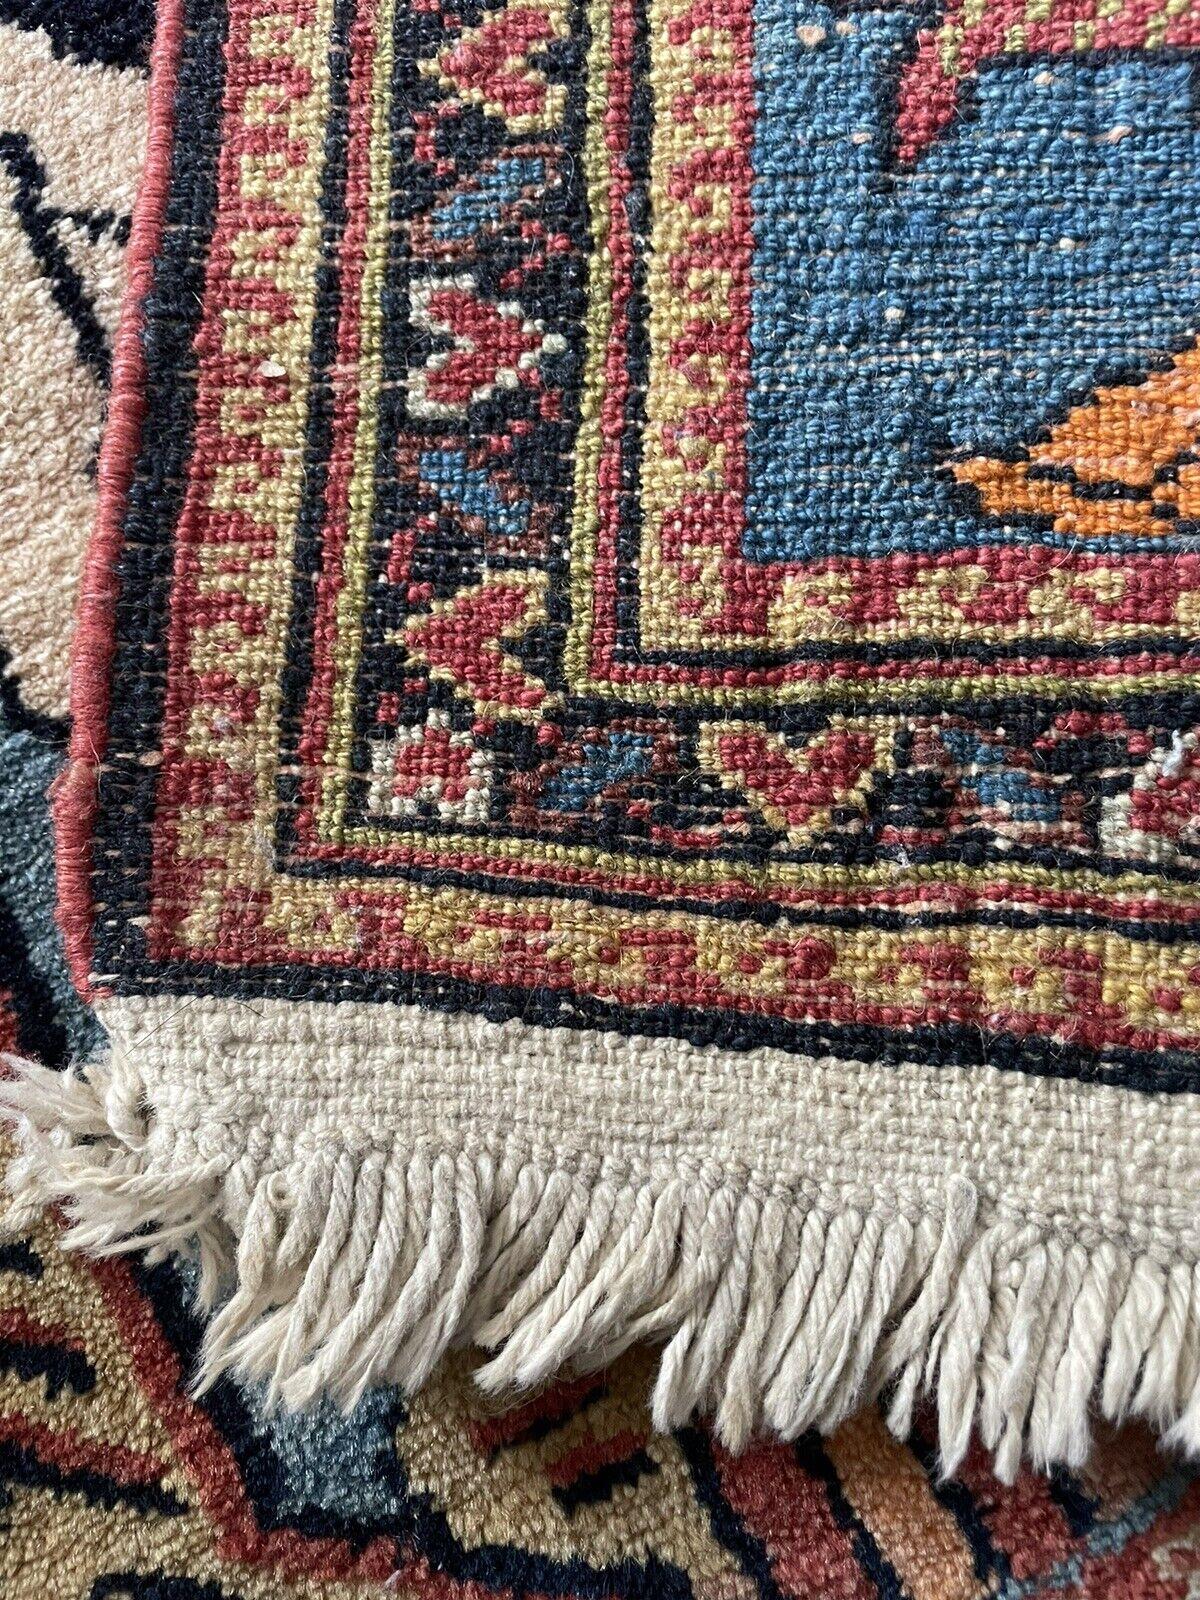 Handmade Antique Persian Style Lilihan Collectible Rug 2.2' x 3.1', 1920s - 1N01 For Sale 6